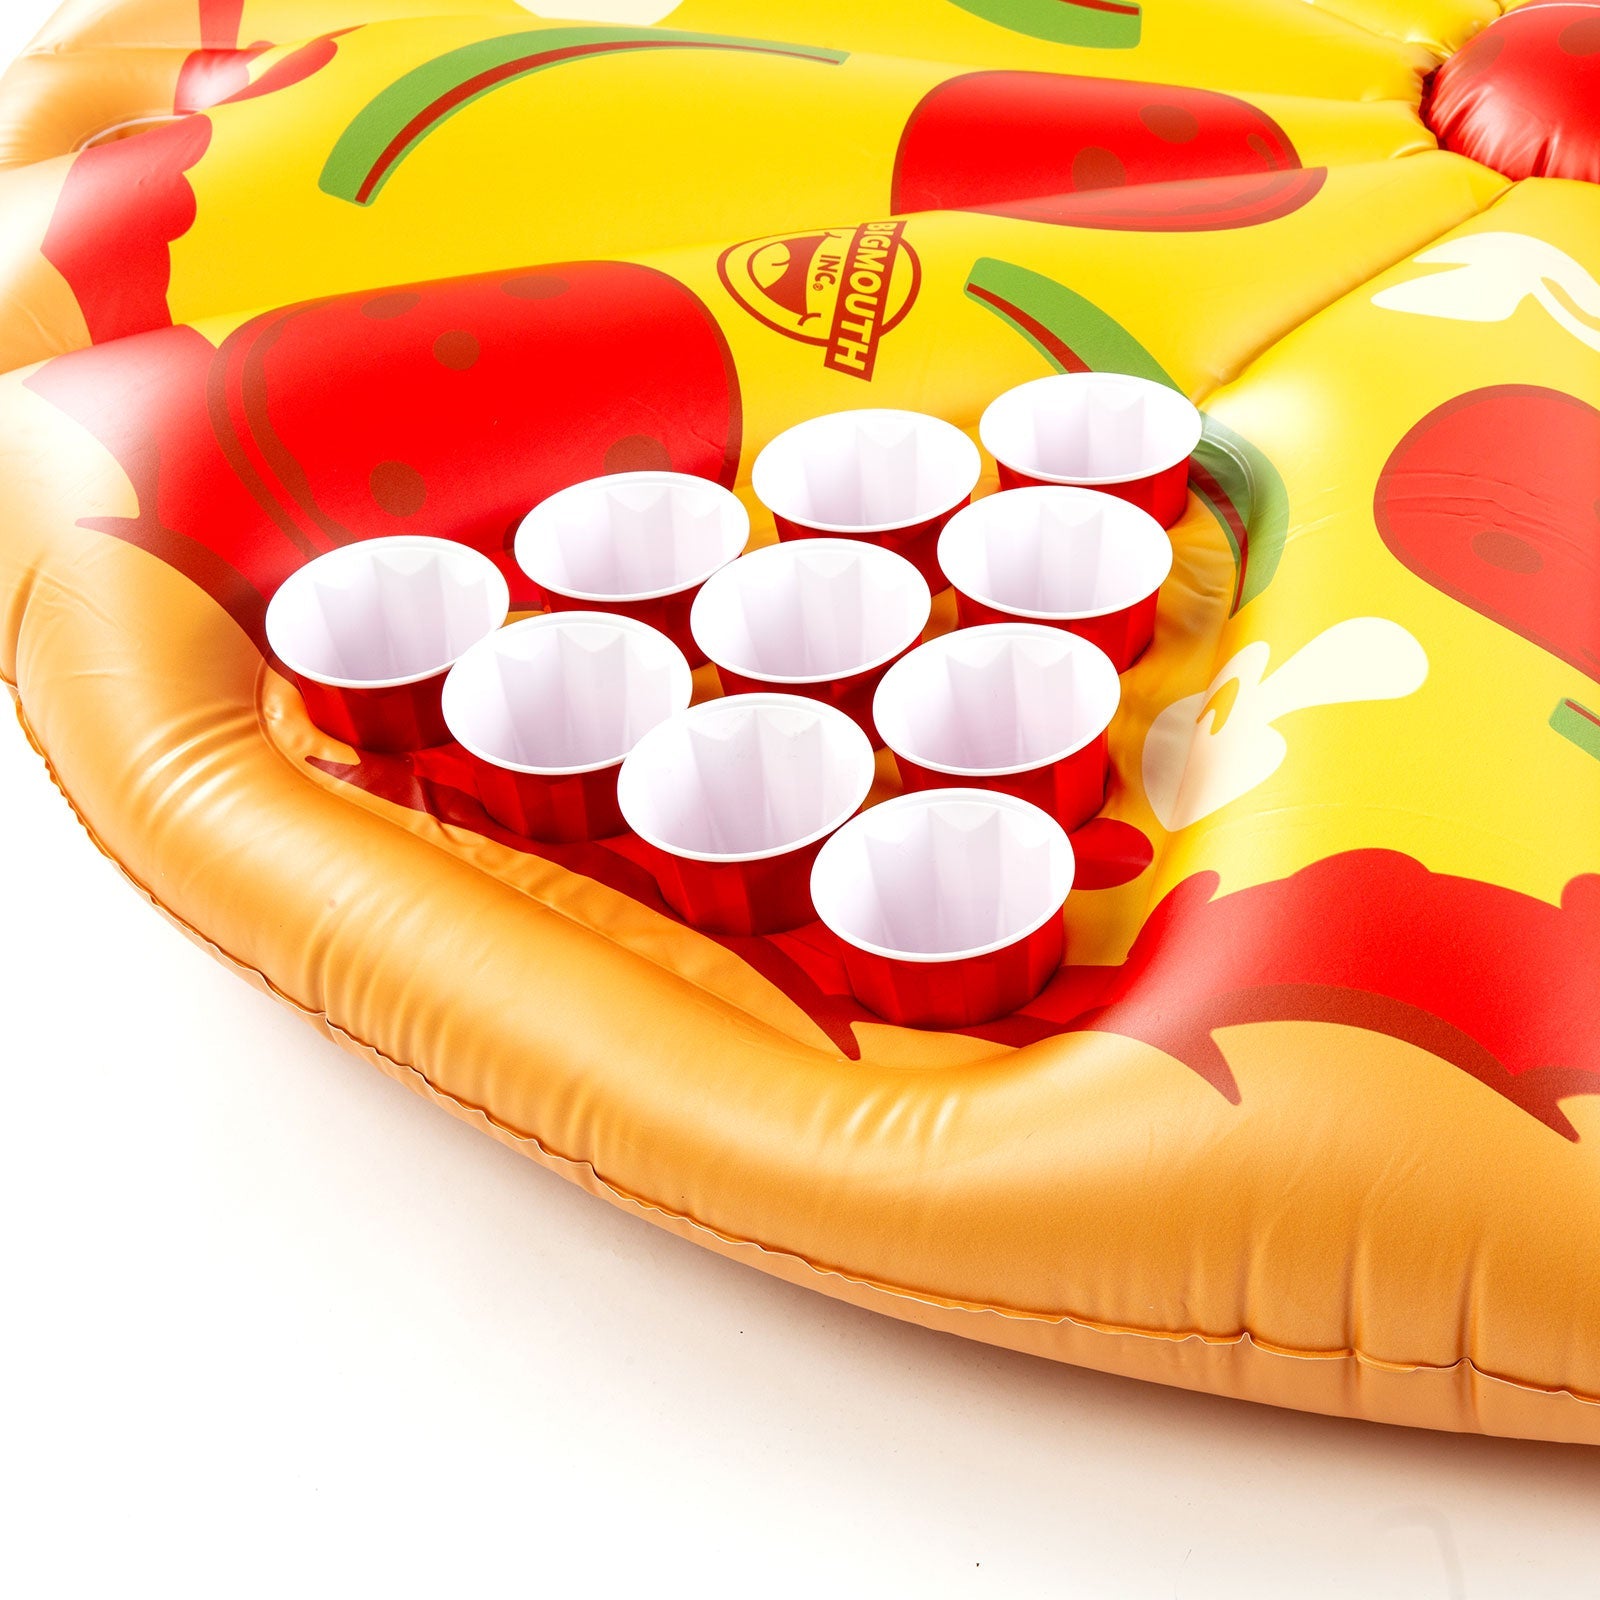 Pizza Pong